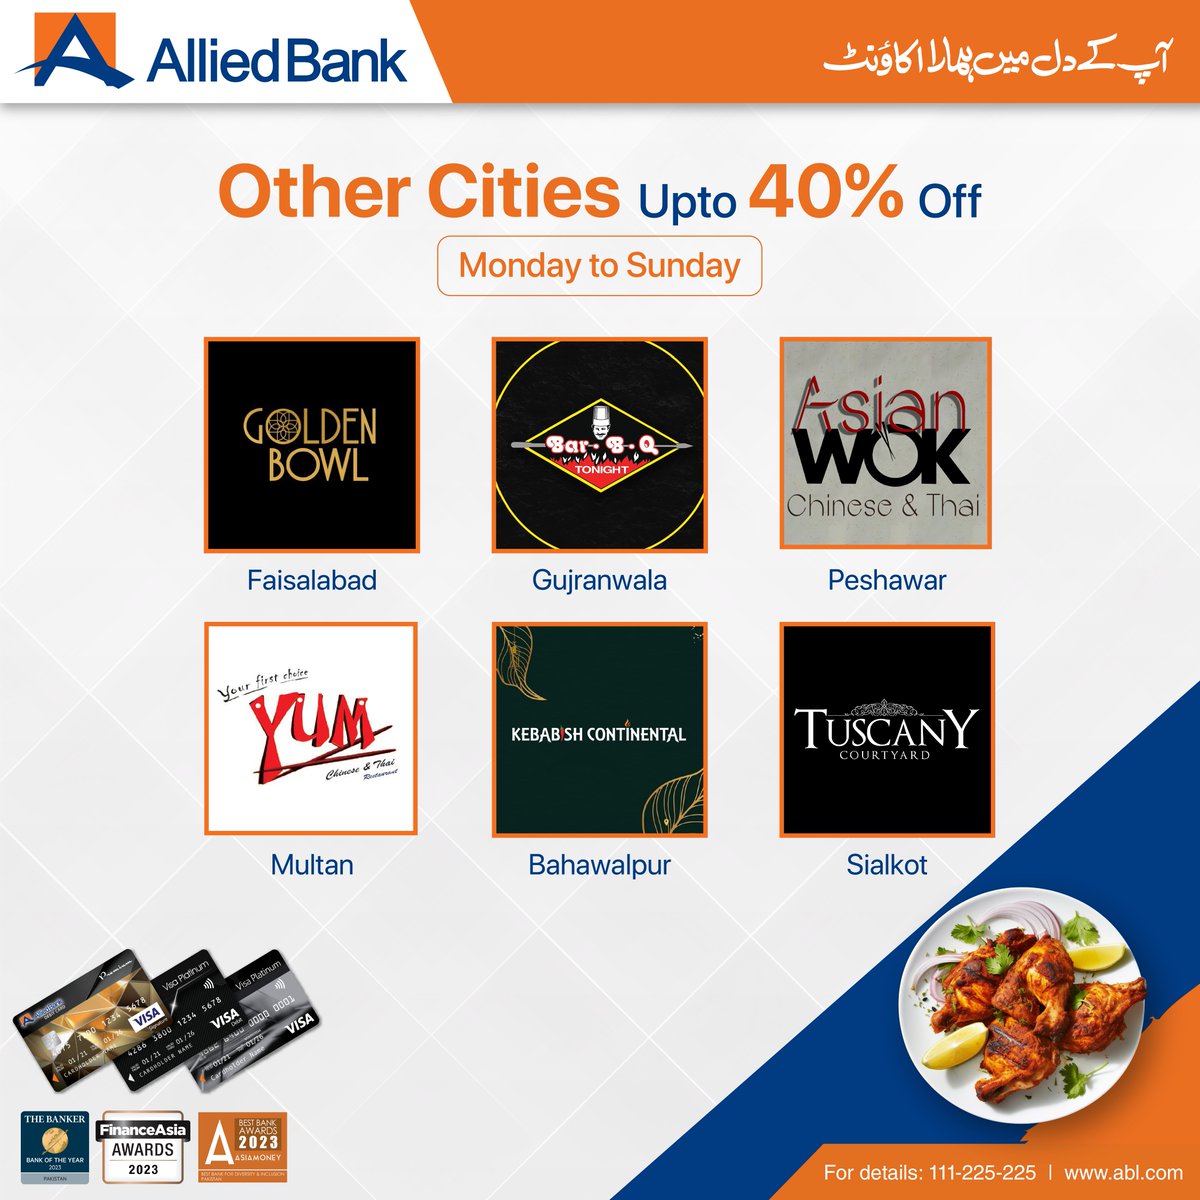 Savor the flavor & save your wallet! Get up to 40% off at the best restaurants in town with your ABL Premium & Platinum cards. It’s time to dine out in style!

For more deals & discounts, visit: abl.com/latest-offers 
    
#ABL #Discounts #DebitCard #CreditCard